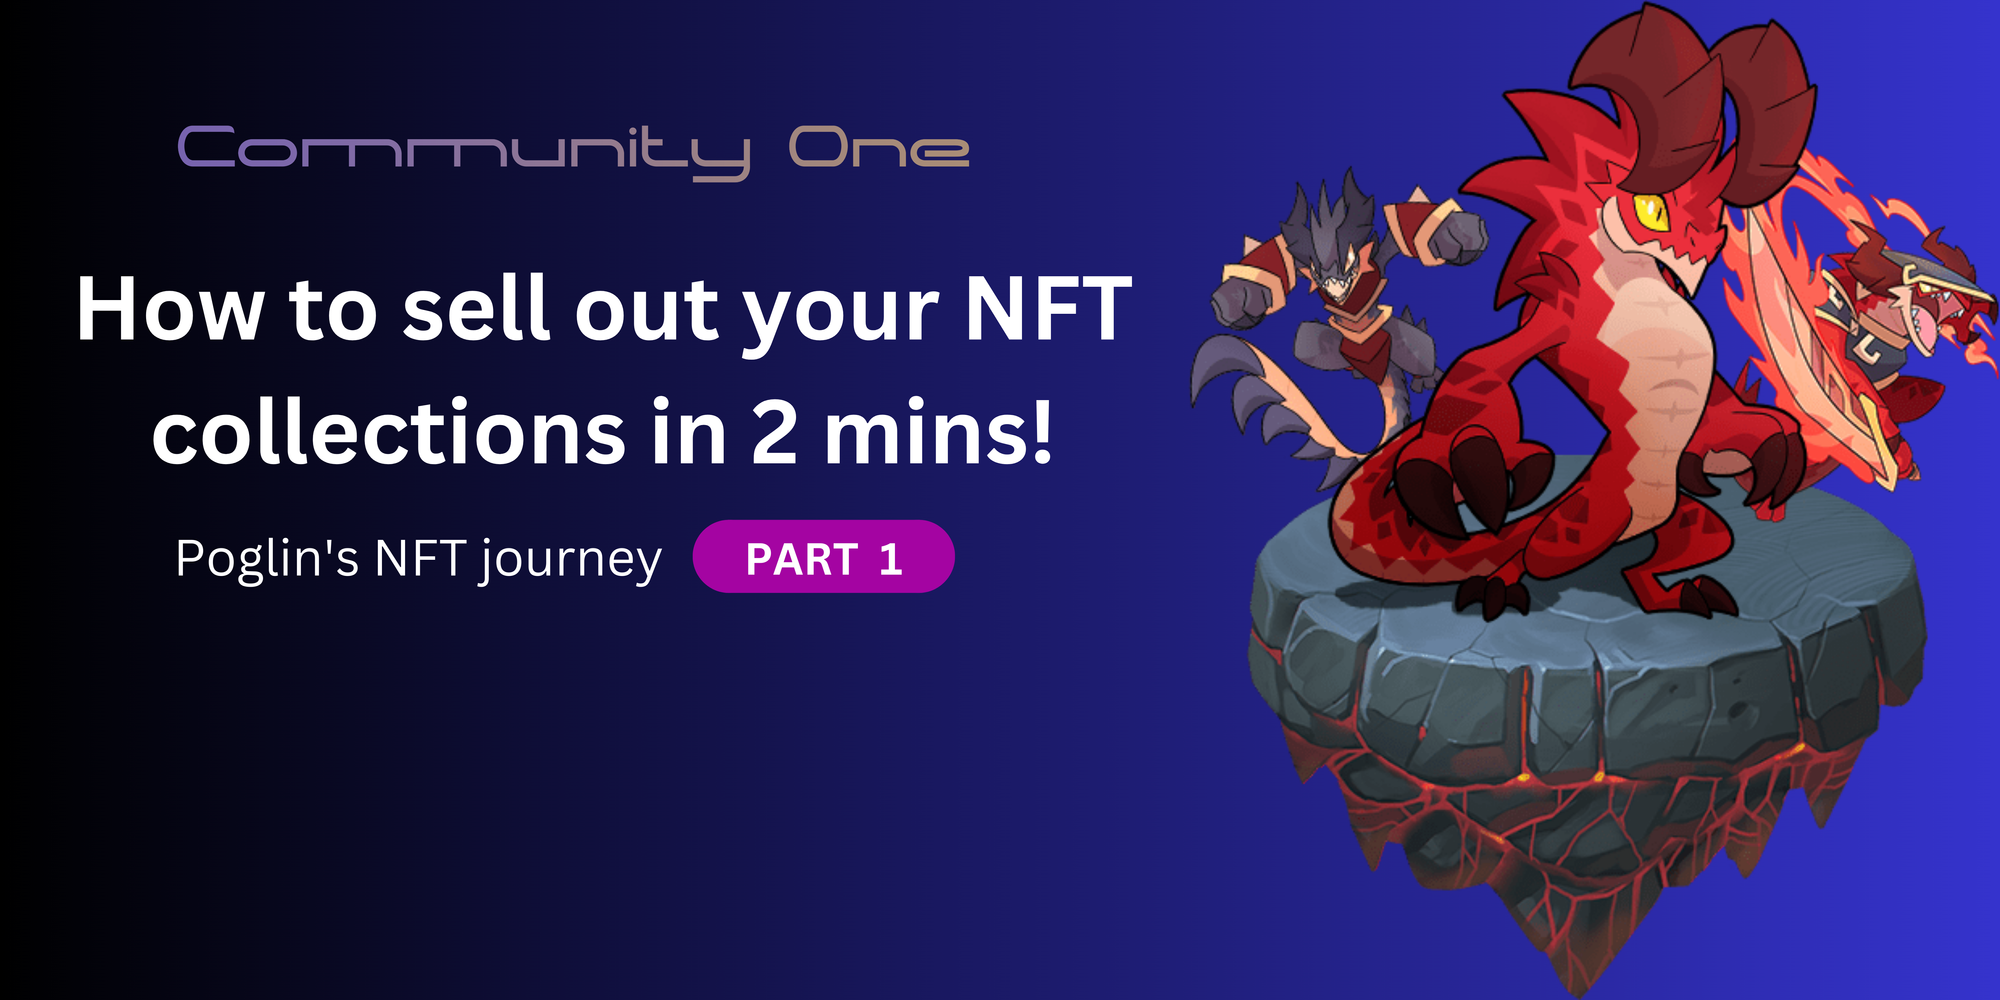 How to sell out your NFT collections in 2 mins!